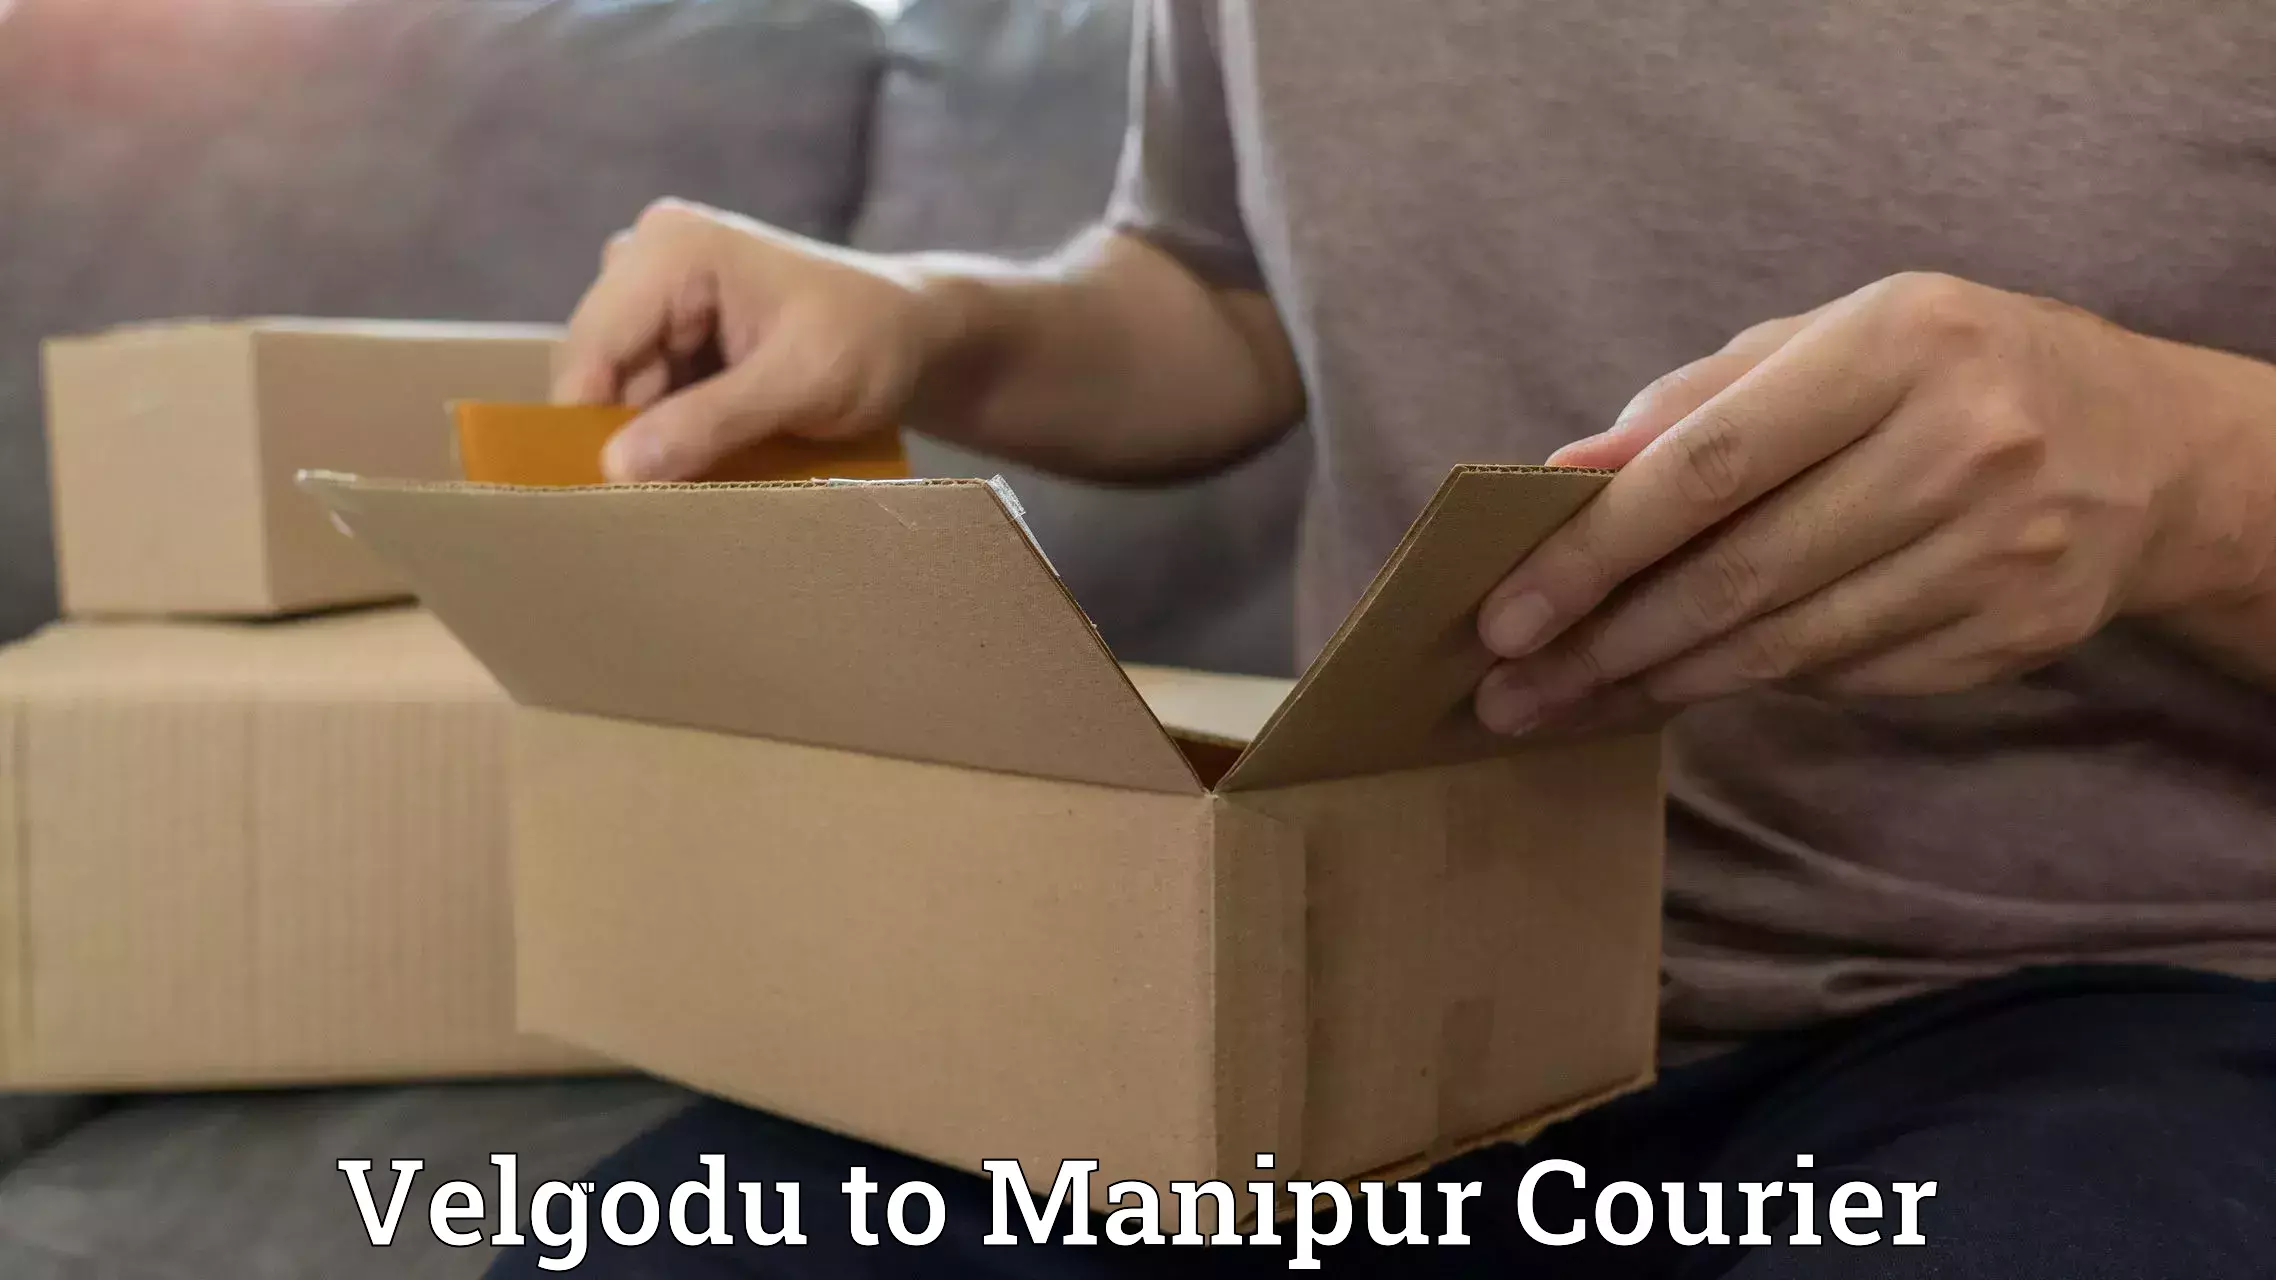 Personal parcel delivery Velgodu to Manipur